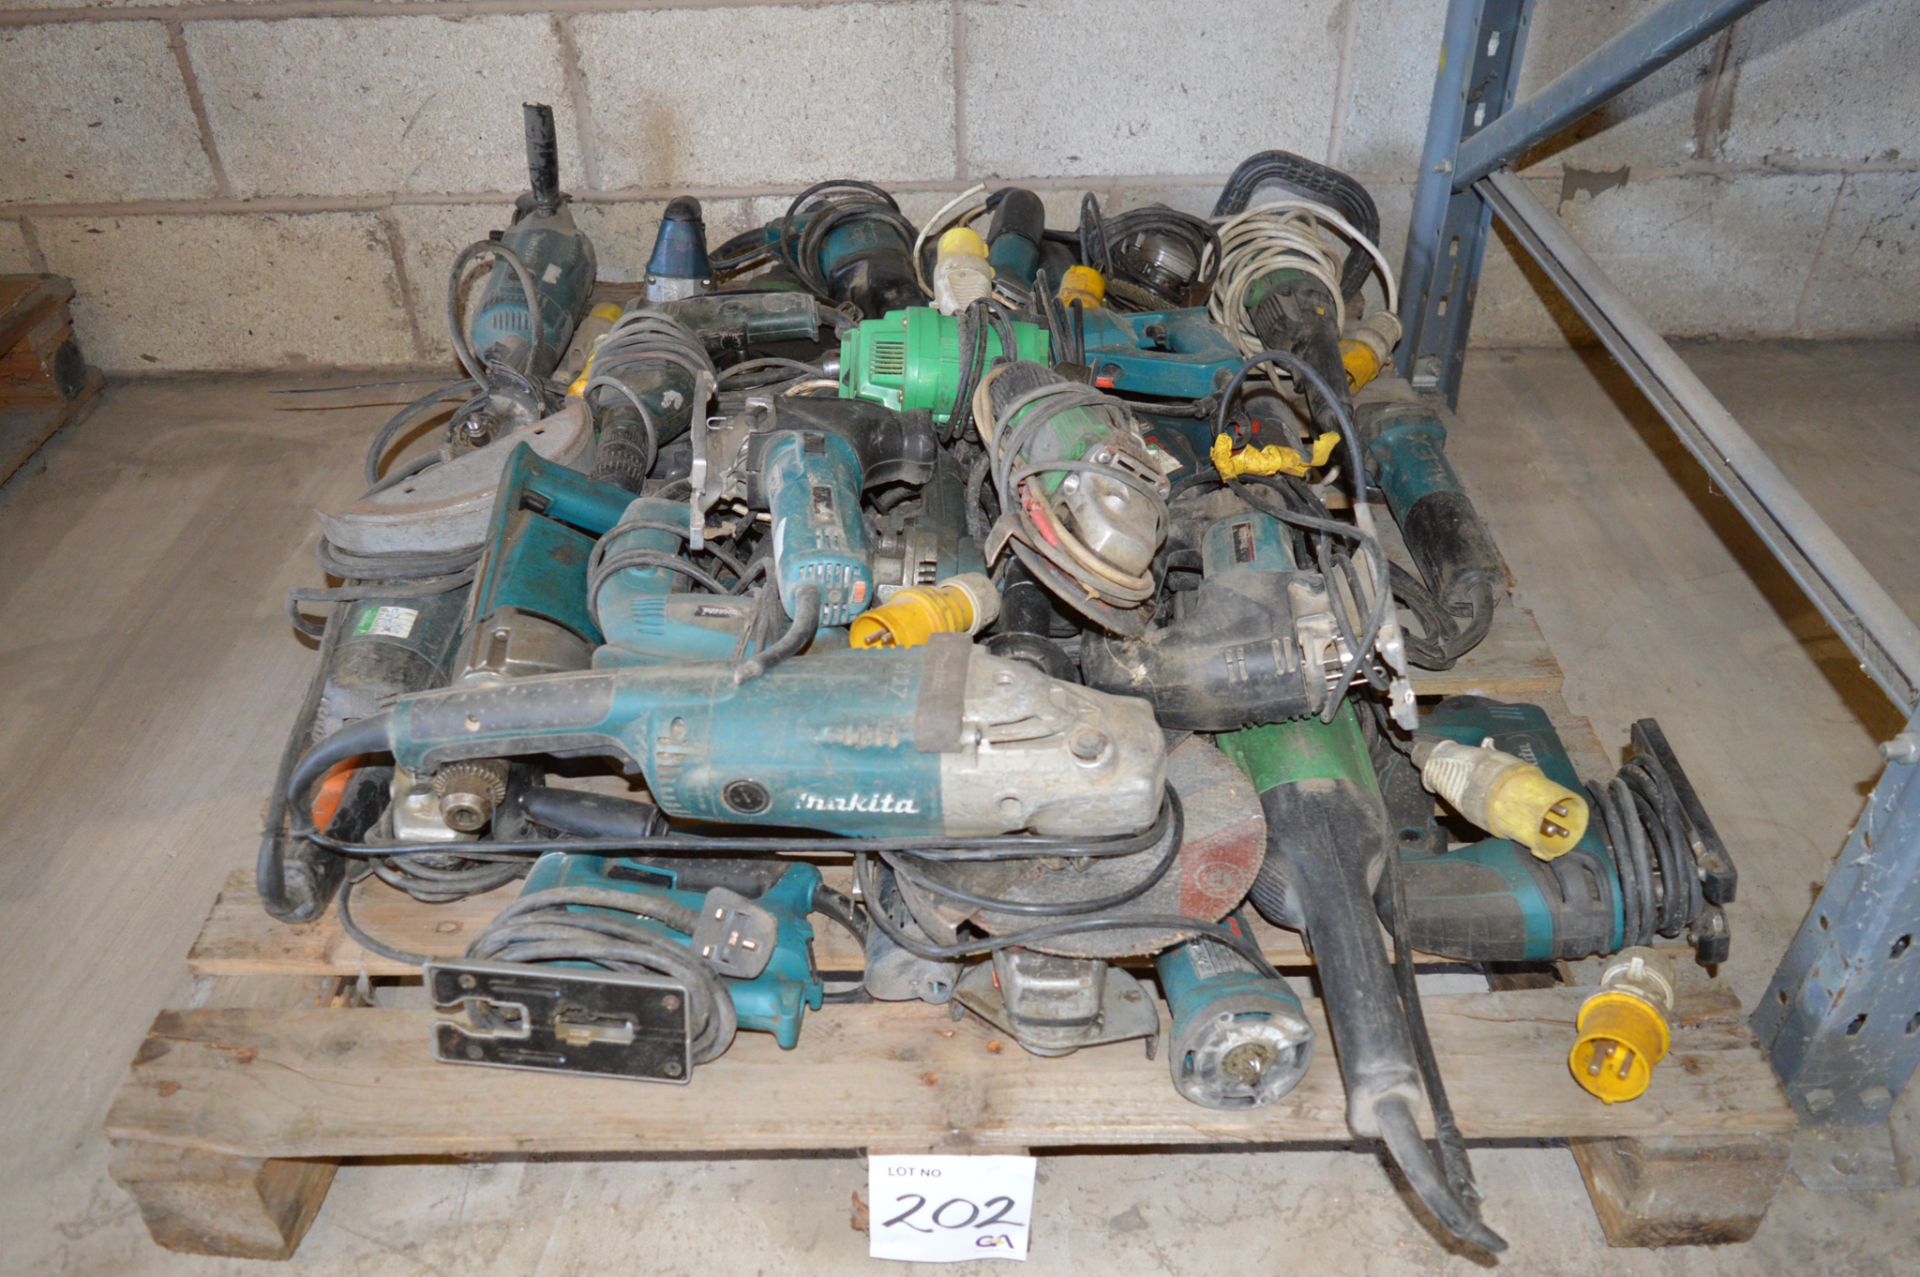 Quantity of 110v and 240v power tools ** Require attention ** ** No VAT on hammer price but VAT will